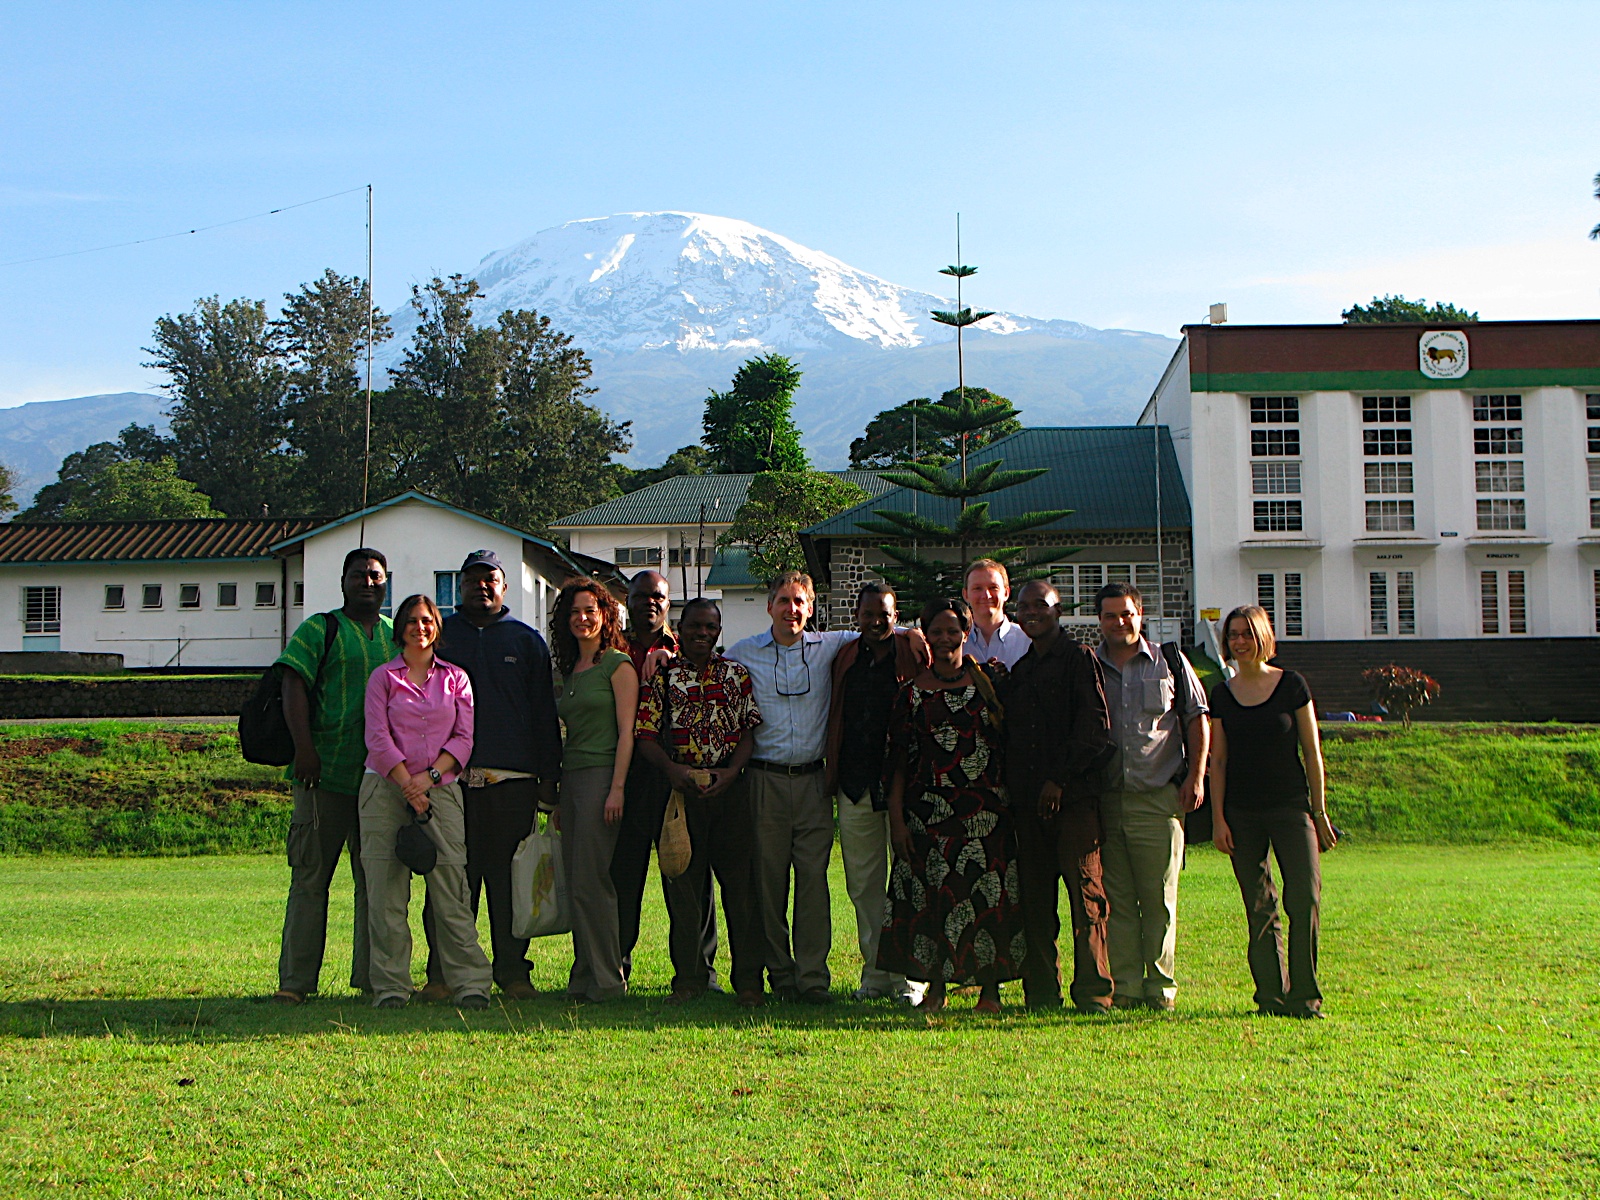 The core workshop group at Mweka College in 2008. That's me on the left and Mt. Kilimanjaro in the background.